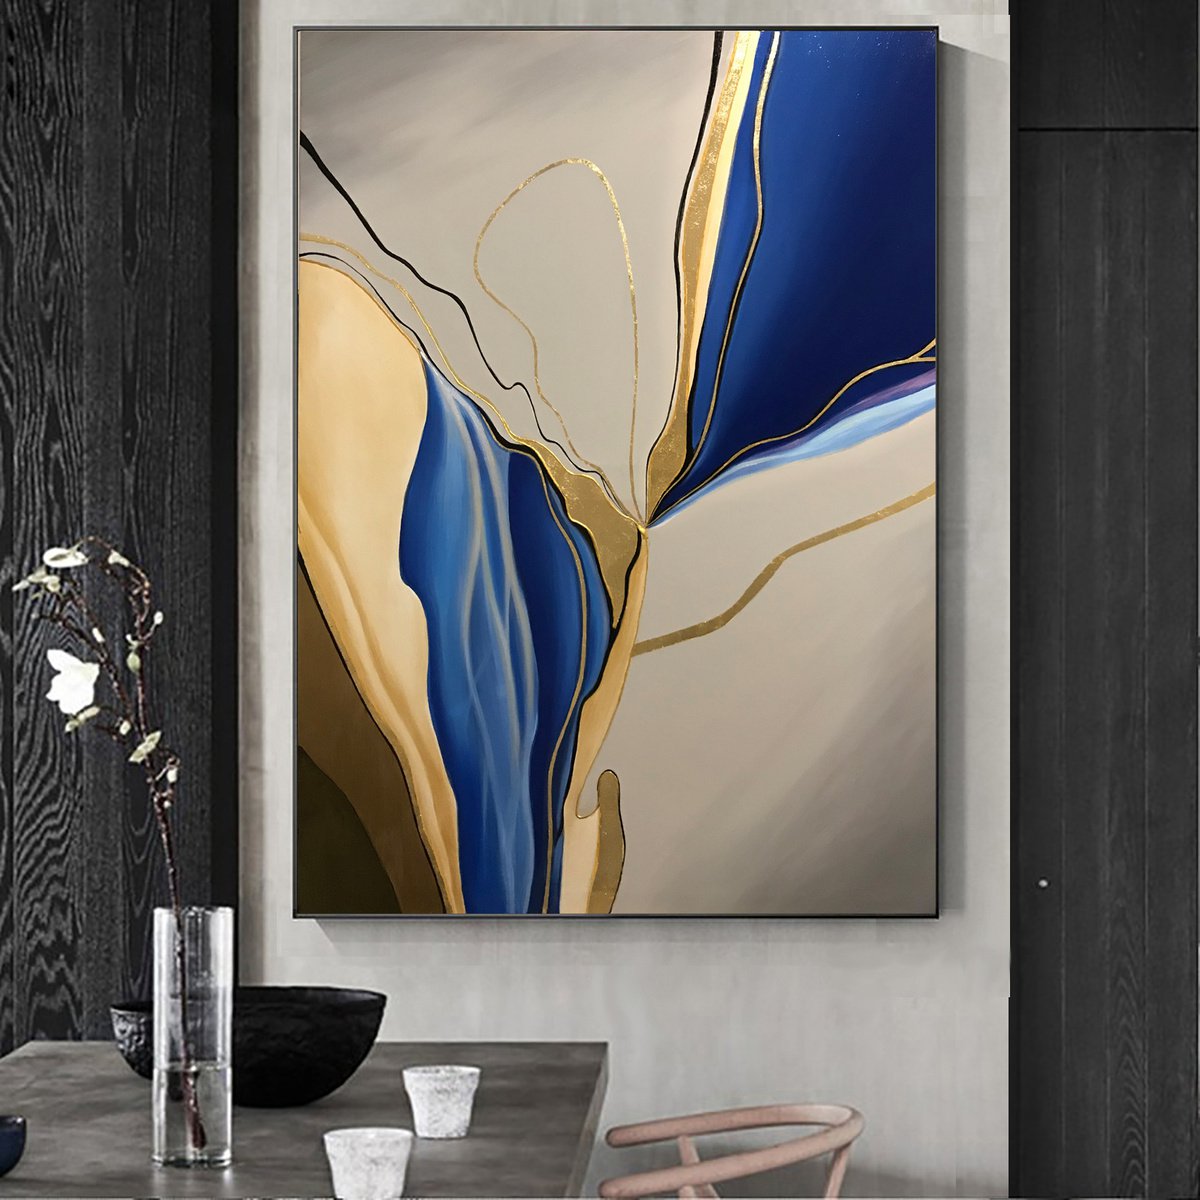 Blue and grey abstract painting Oil painting by Dmitry King | Artfinder